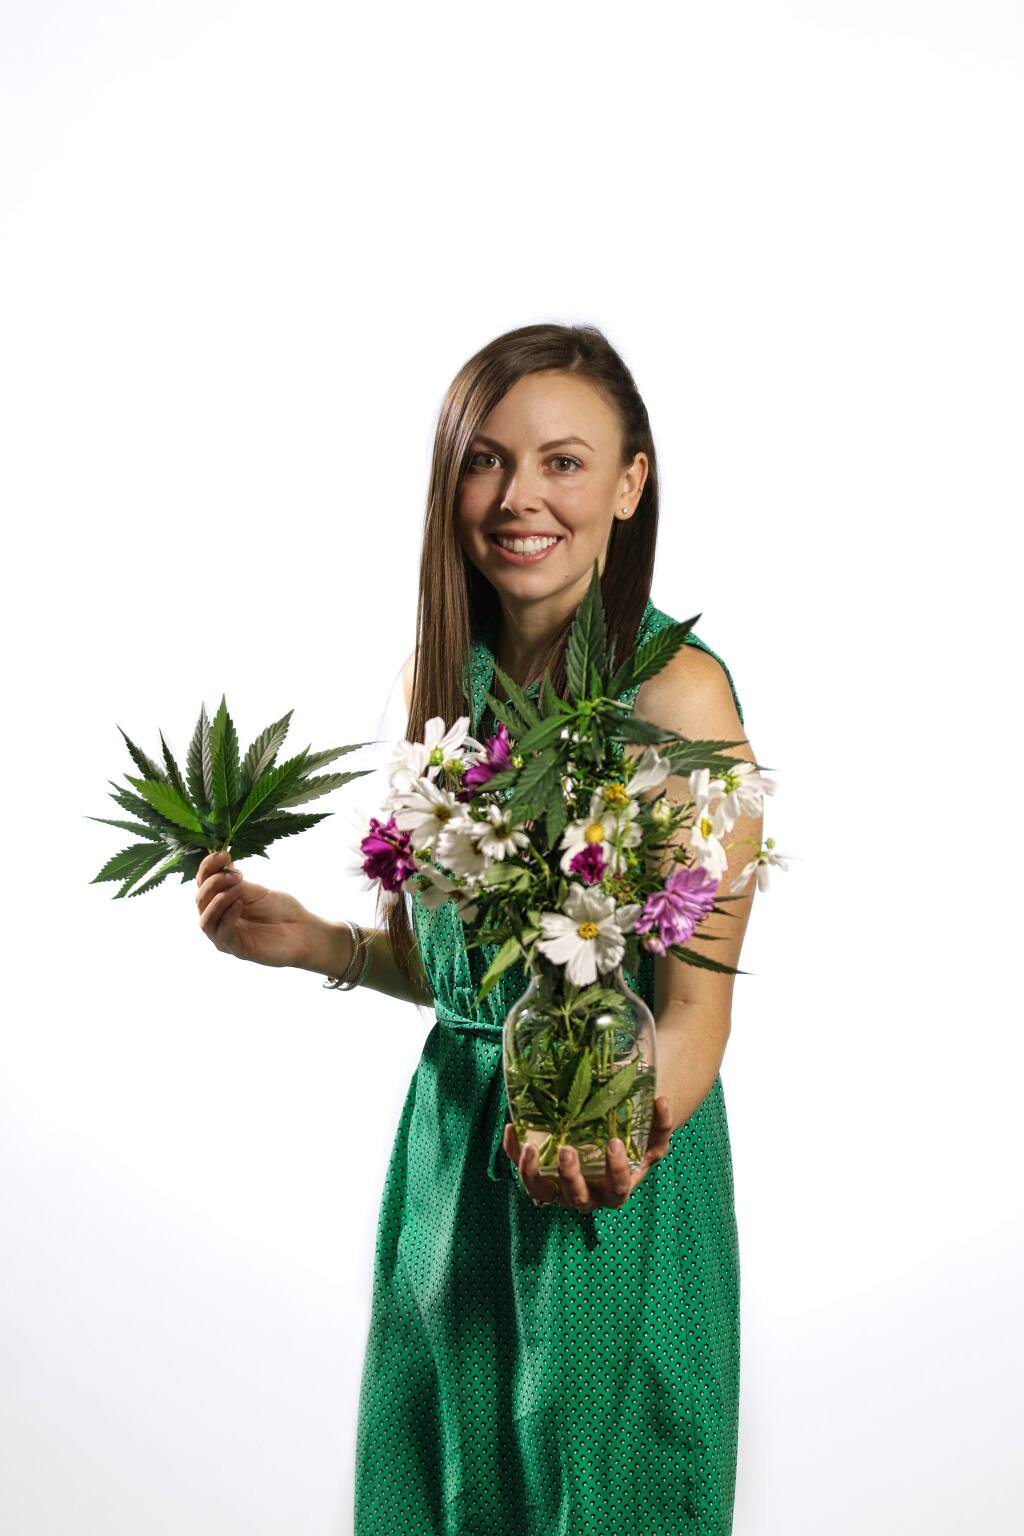 Alexa Wall is co-owner of cannabis delivery service Moonflower Delivery in San Rafael and cultivation company Luma California in Santa Rosa. (Jeff Quackenbush / North Bay Business Journal) Aug. 26, 2019